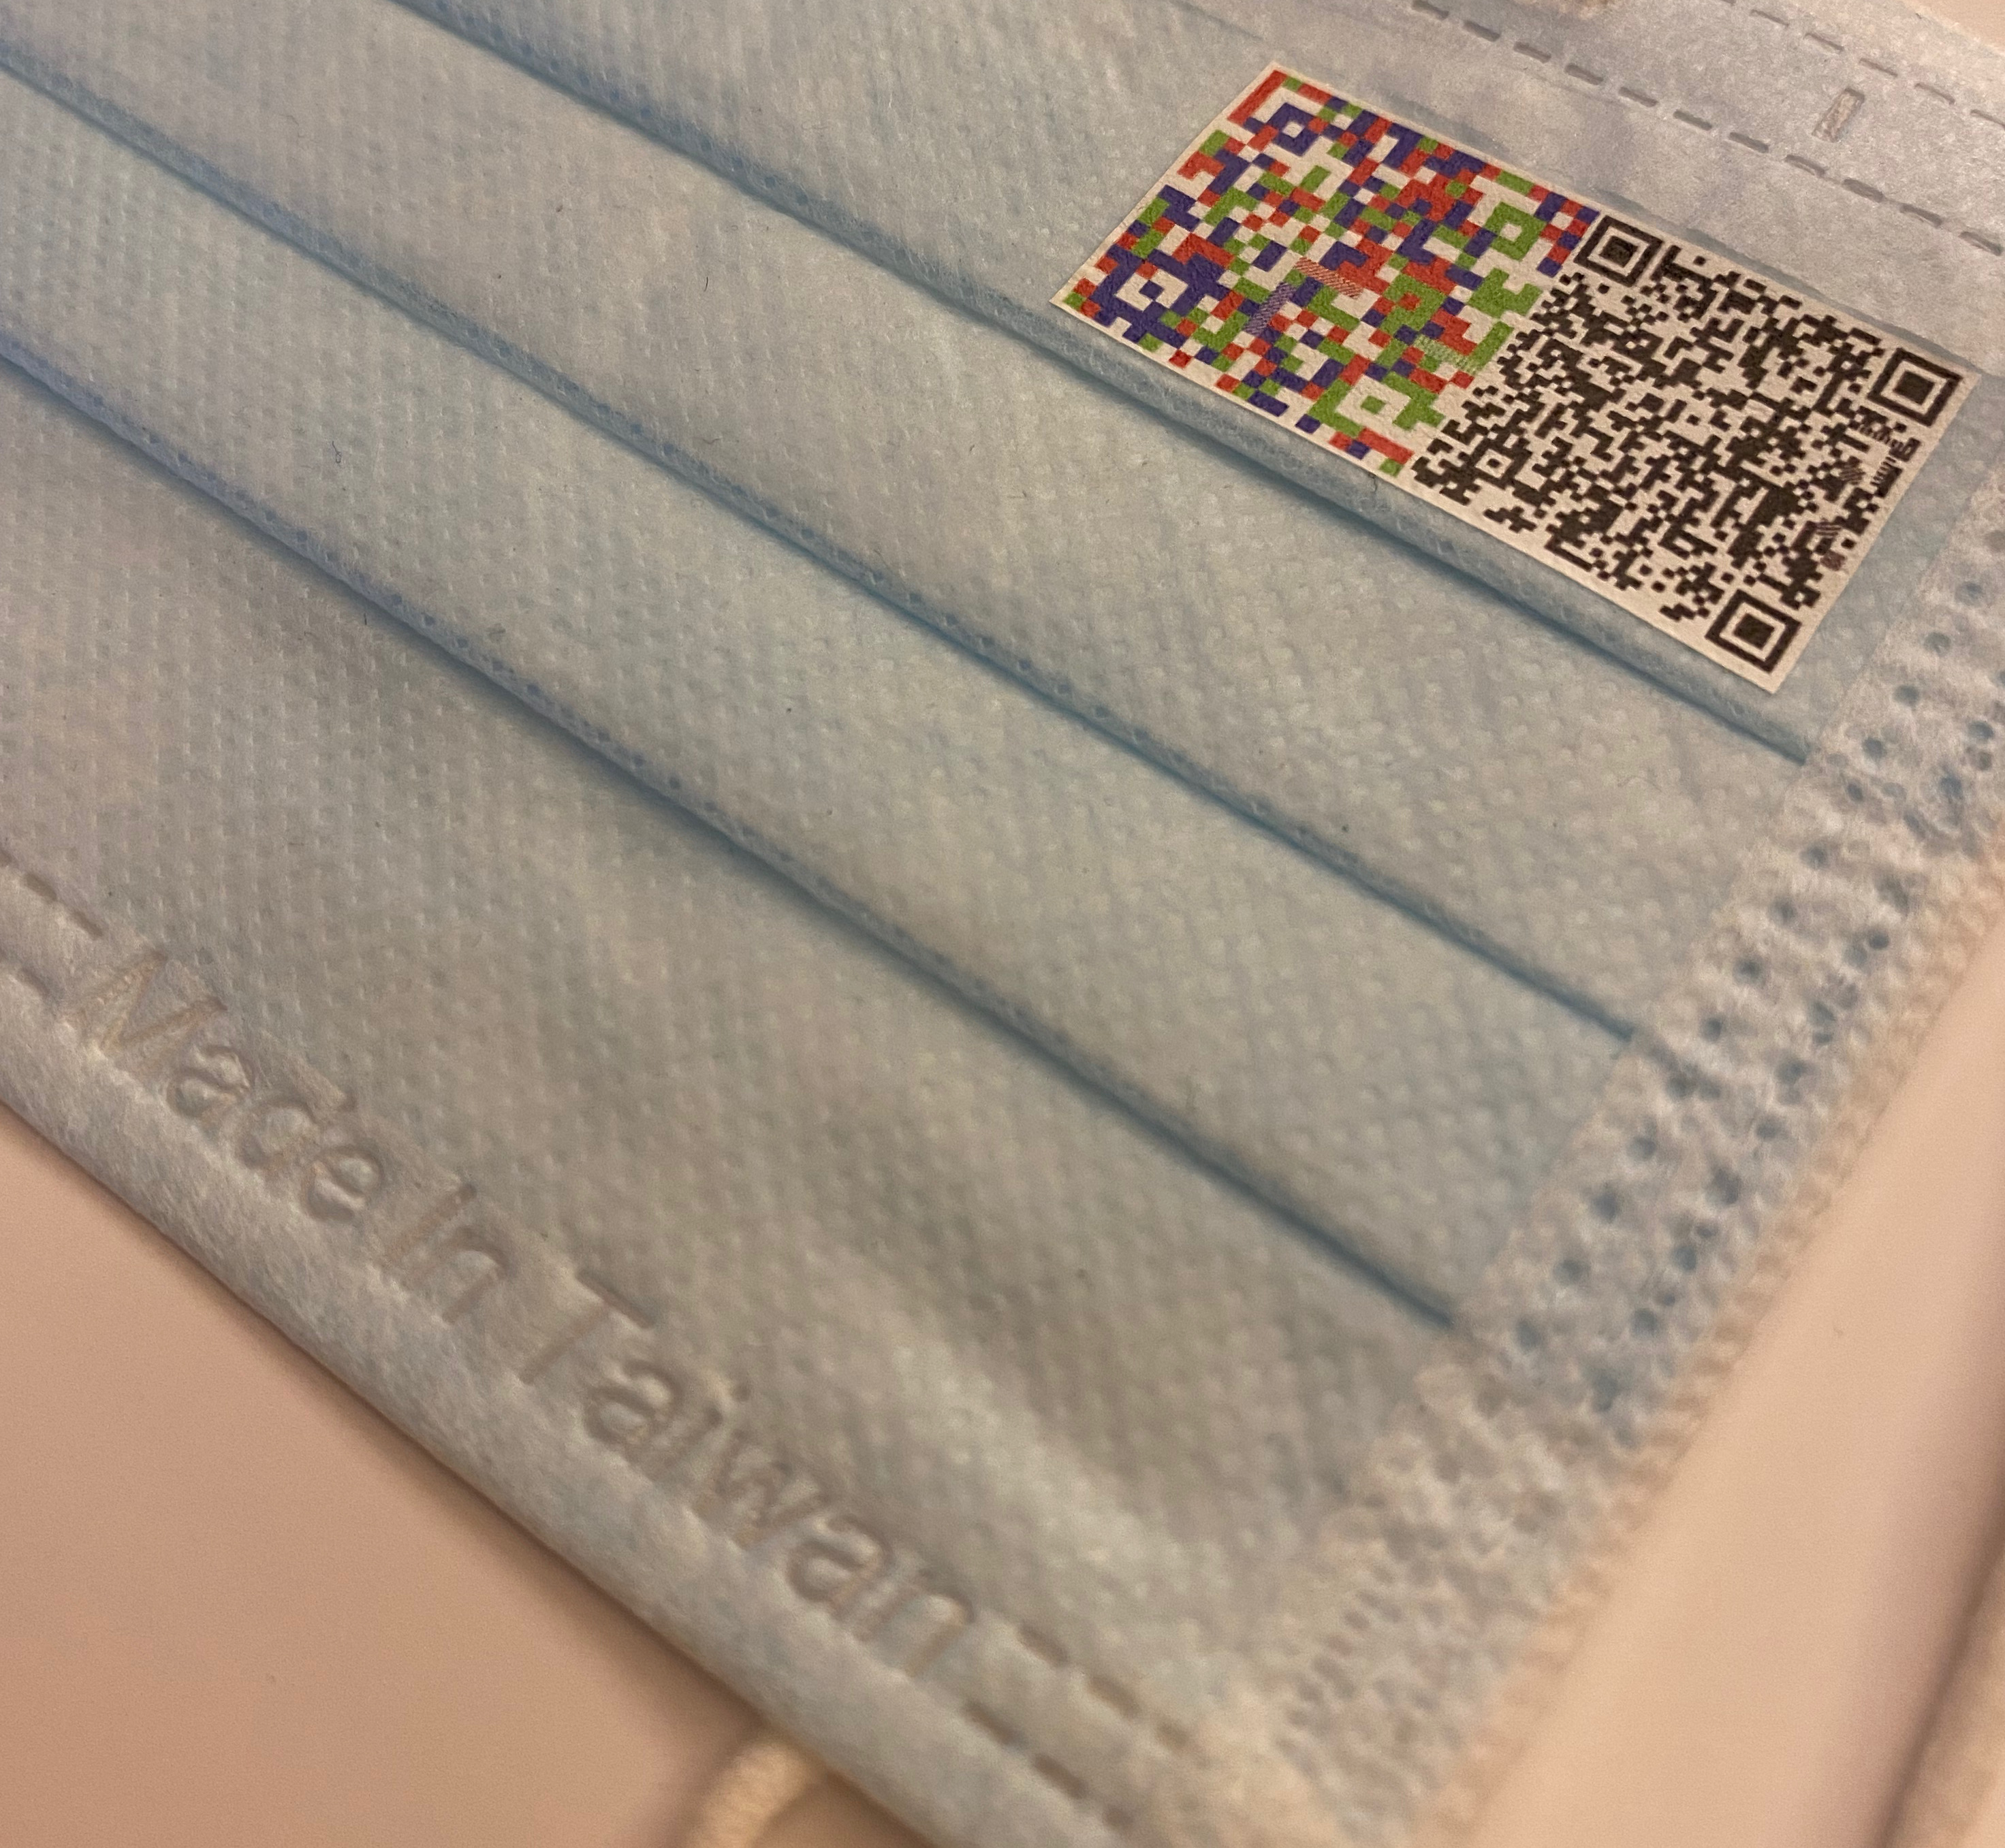 Authentication On Fabrics During Pandemic